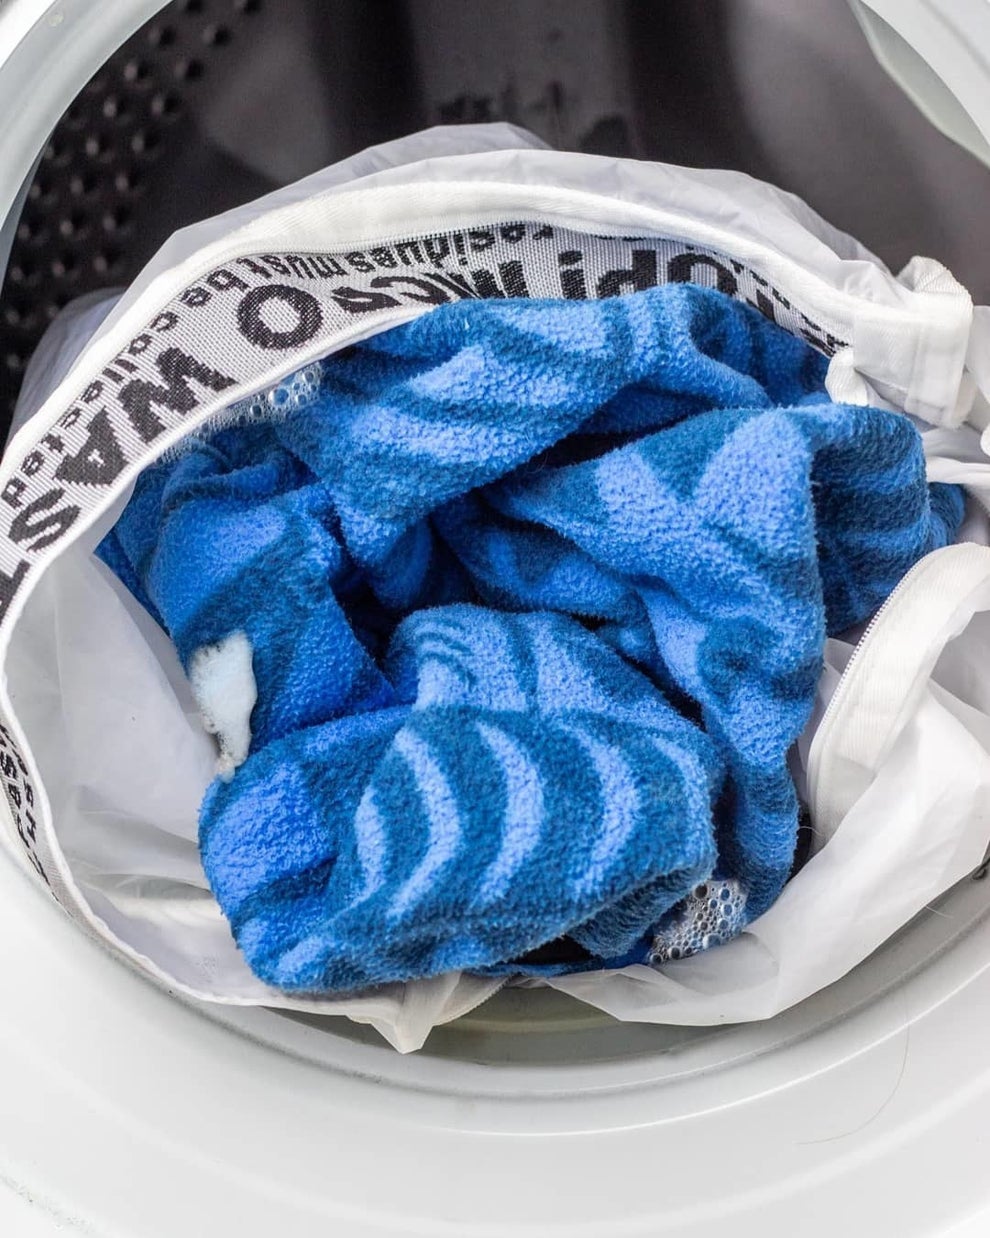 This Genius Washing Bag Can Help You Seriously Cut Plastic Waste